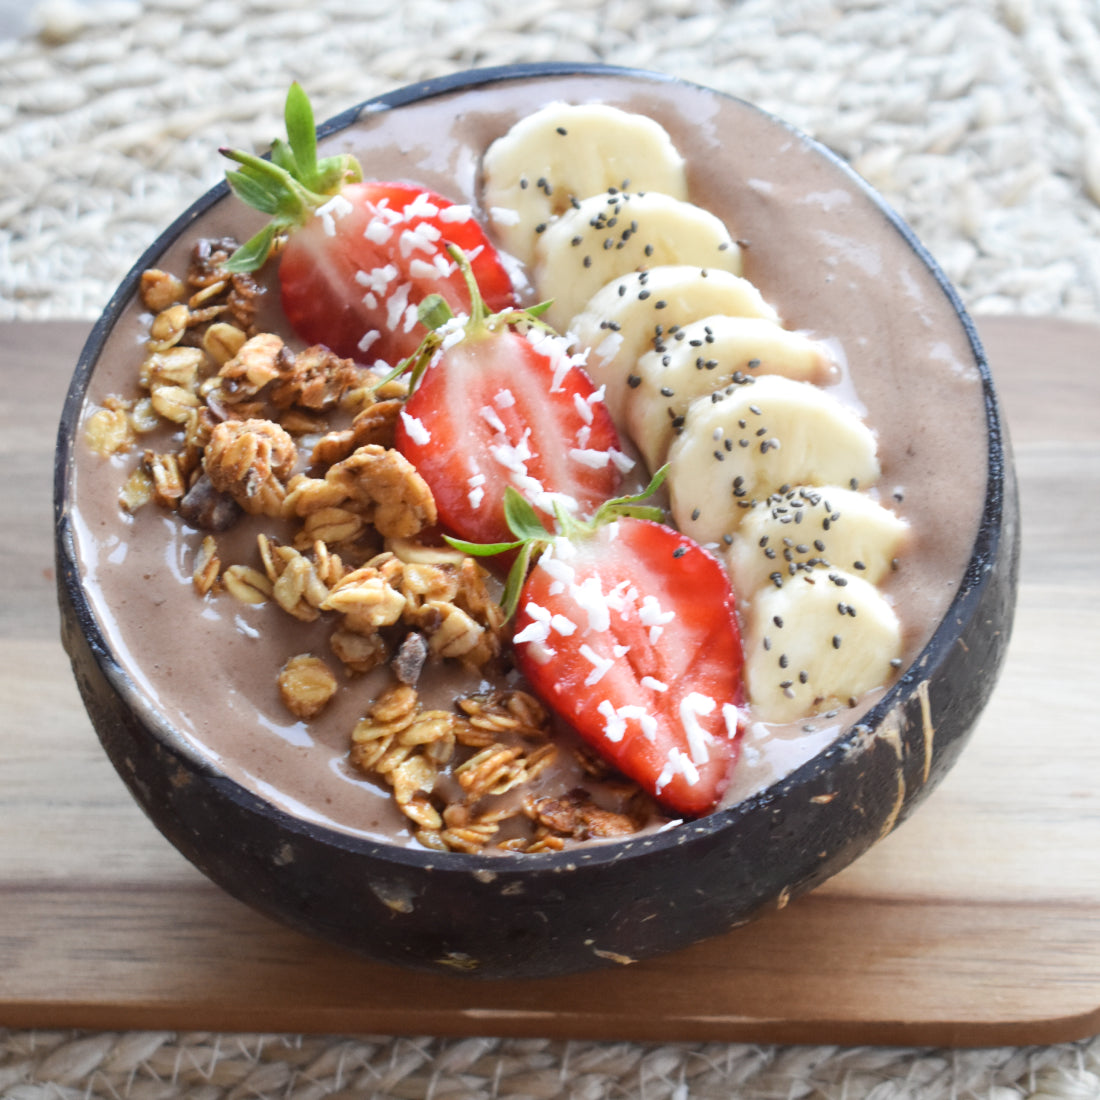 Start Your Day Smartly with KIANO's Brain-Boosting Magic Mushroom Chocolate in Breakfast Bowl